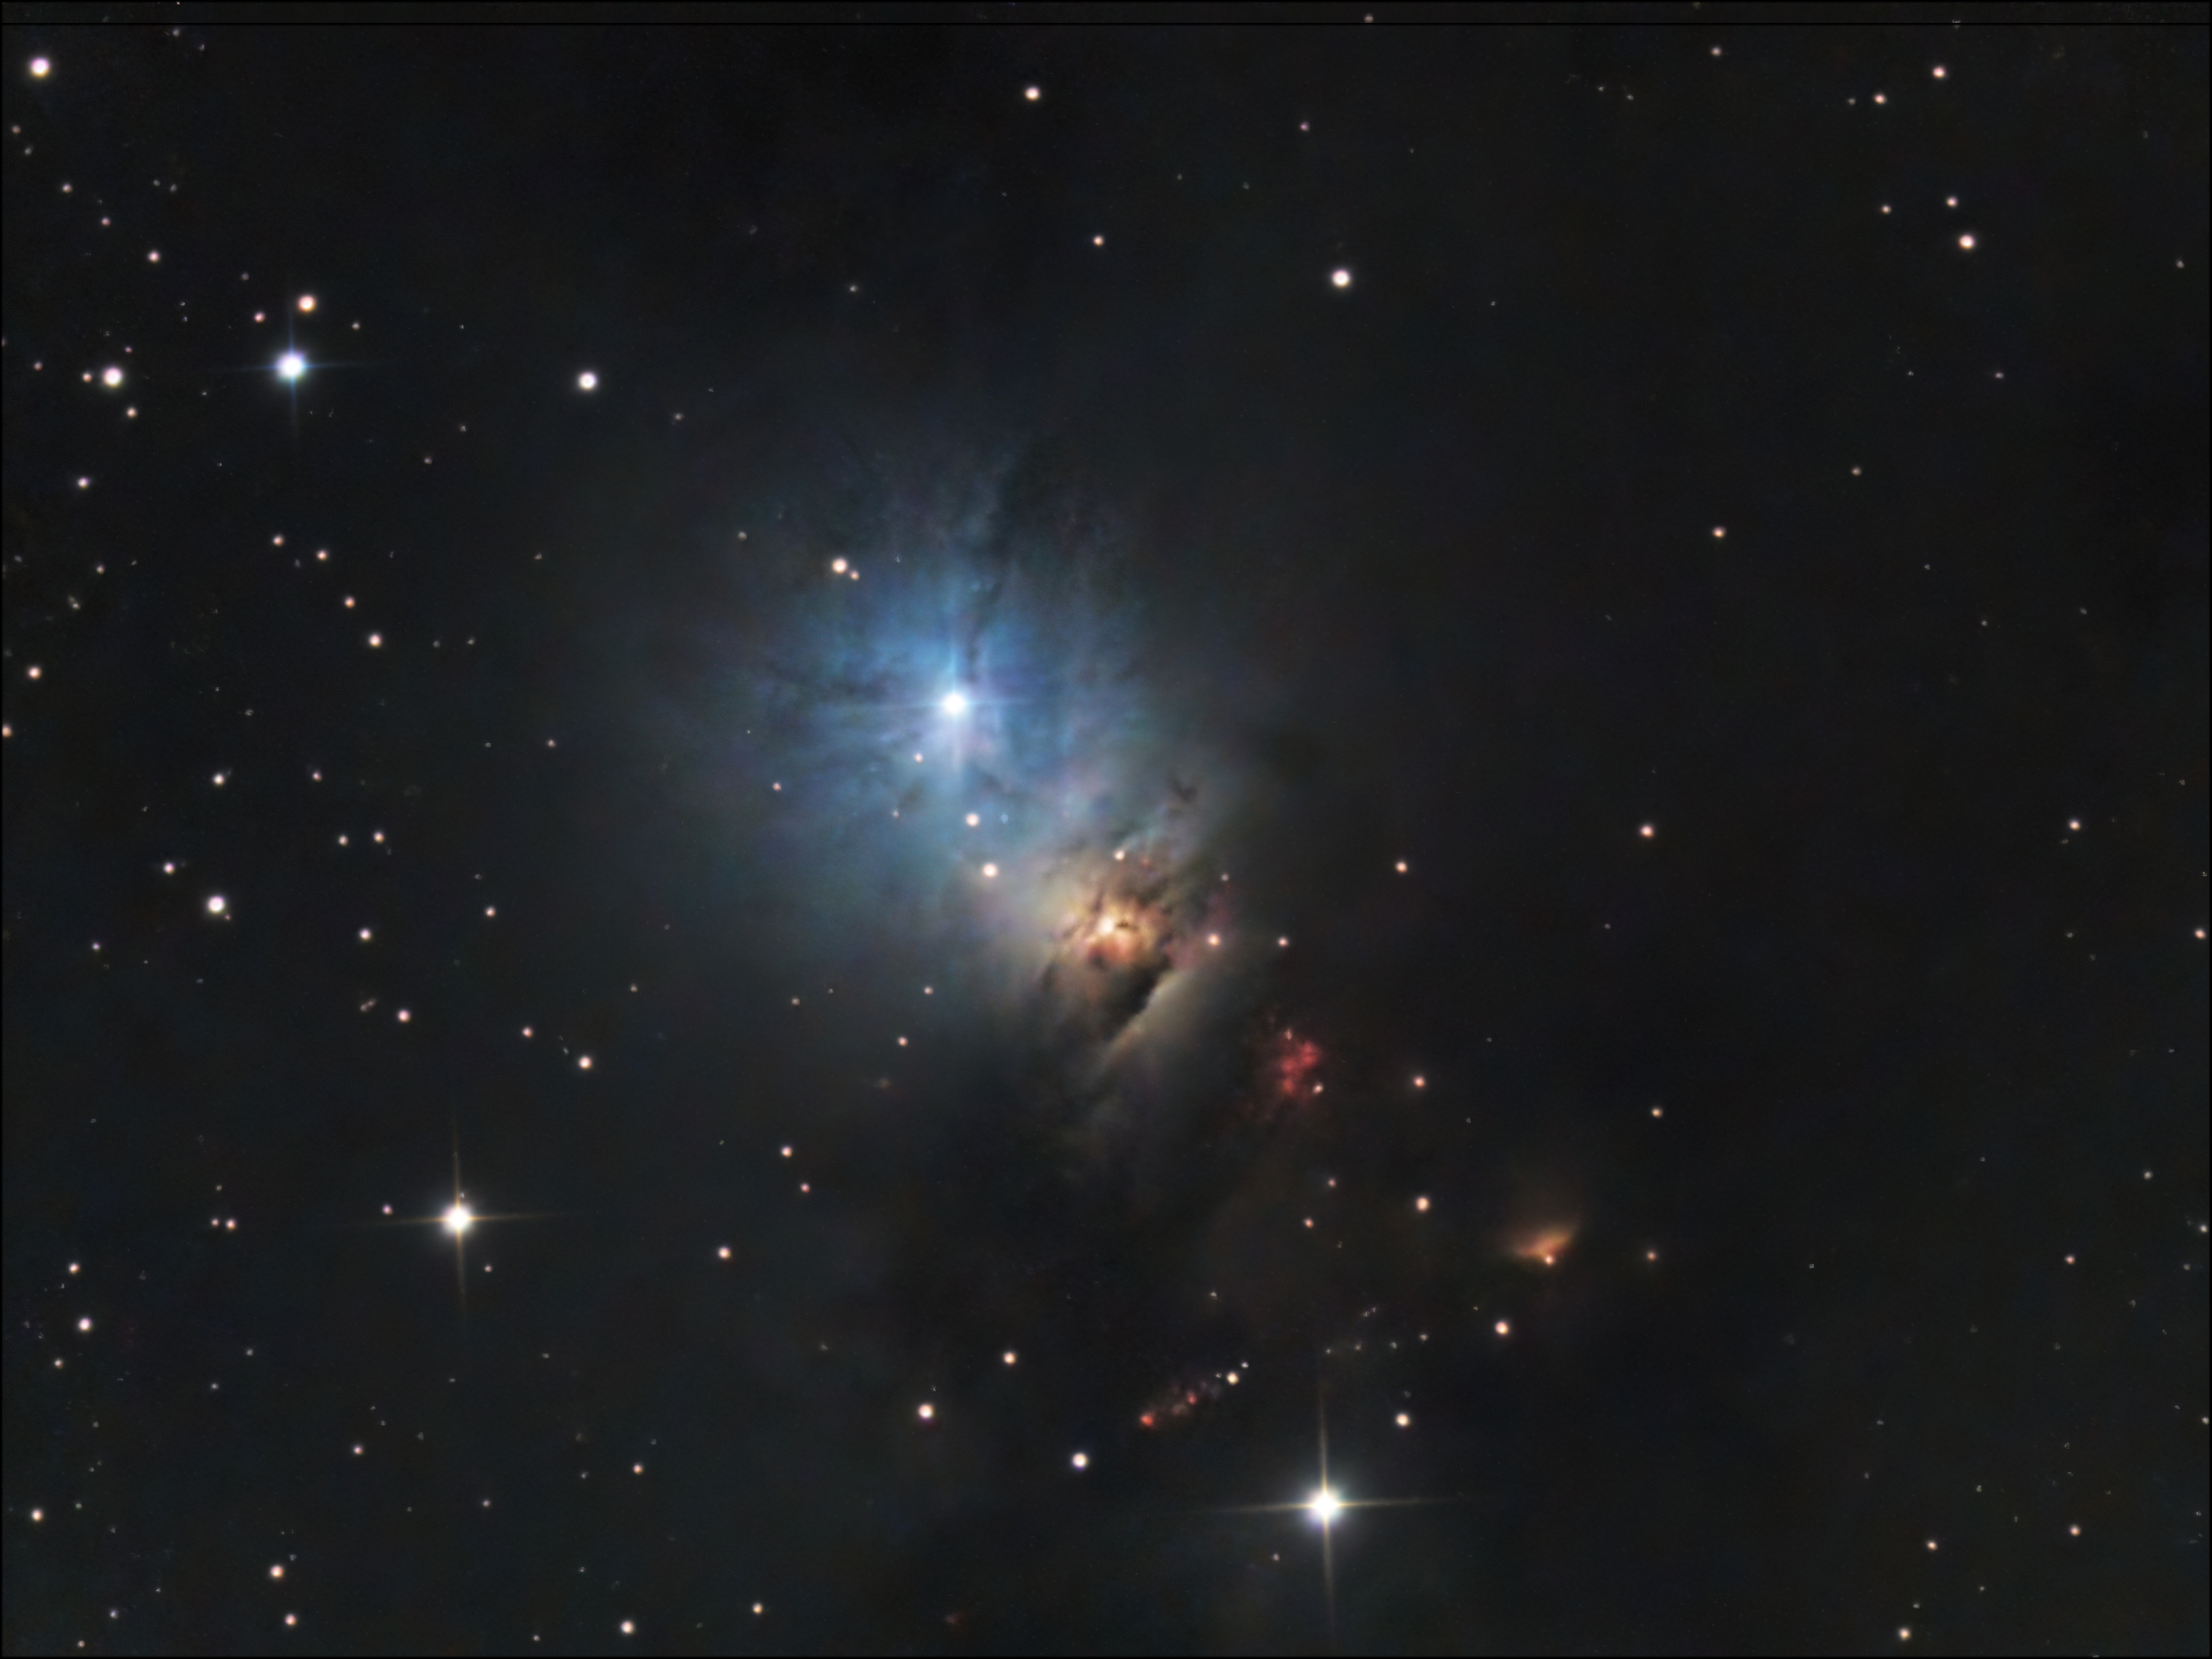 Reflection nebula in Perseus